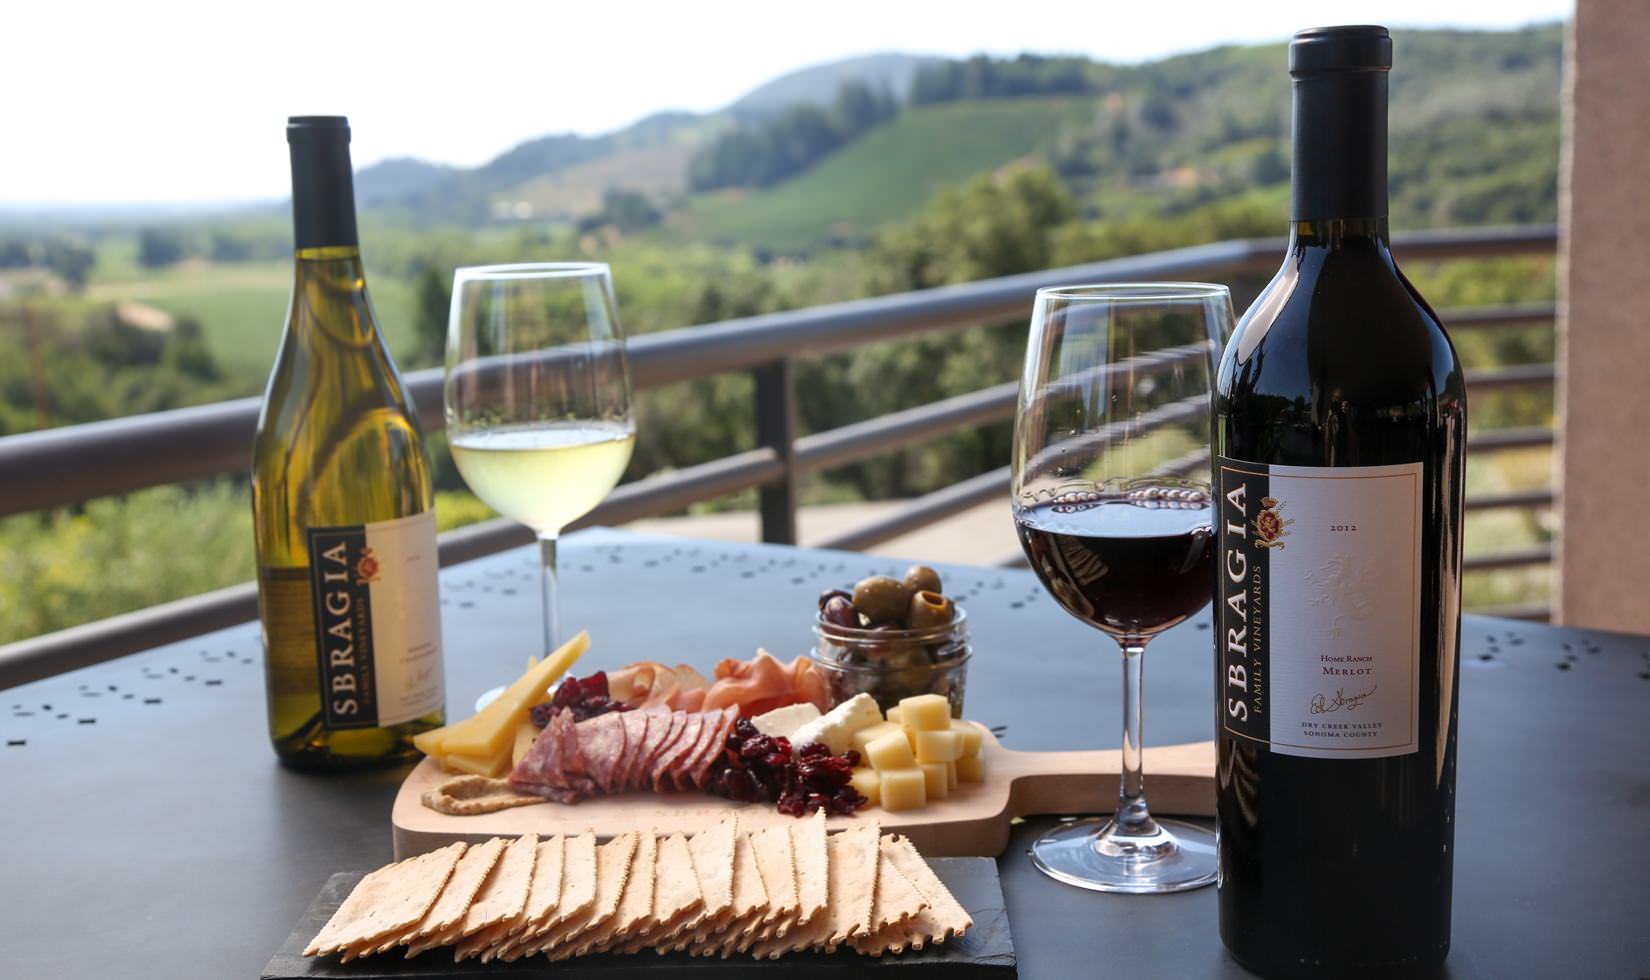 Sbragia Winery patio with cheese and charcuterie board a bottle of Sbragia white wine and a bottle of Sbragia red wine and two poured glasses